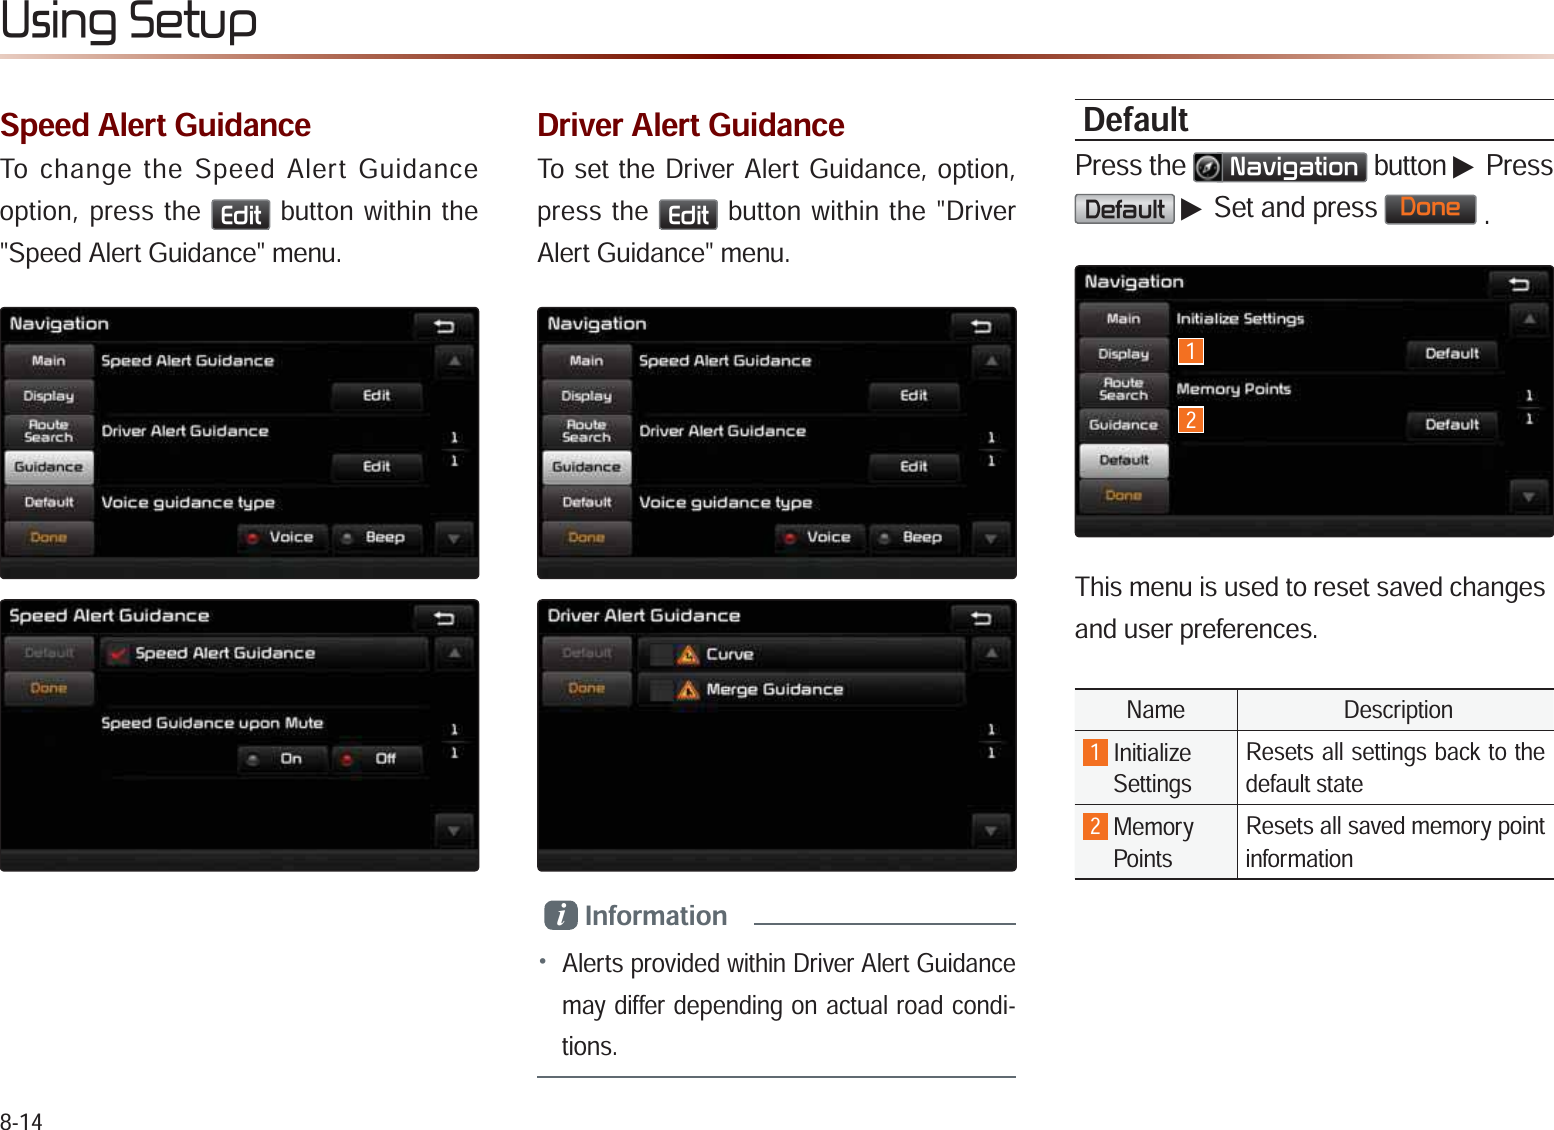 8-148VLQJ6HWXSSpeed Alert Guidance To change the Speed Alert Guidance option, press the (GLW button within the  &quot;Speed Alert Guidance&quot; menu.Driver Alert GuidanceTo set the Driver Alert Guidance, option, press the (GLW button within the &quot;Driver Alert Guidance&quot; menu.i Information • Alerts provided within Driver Alert Guidance may differ depending on actual road condi-tions.DefaultPress the 1DYLJDWLRQ button ▶ Press &apos;HIDXOW▶ Set and press &apos;RQH.This menu is used to reset saved changesand user preferences.Name  Description1 Initialize SettingsResets all settings back to the default state 2 MemoryPoints Resets all saved memory point information12